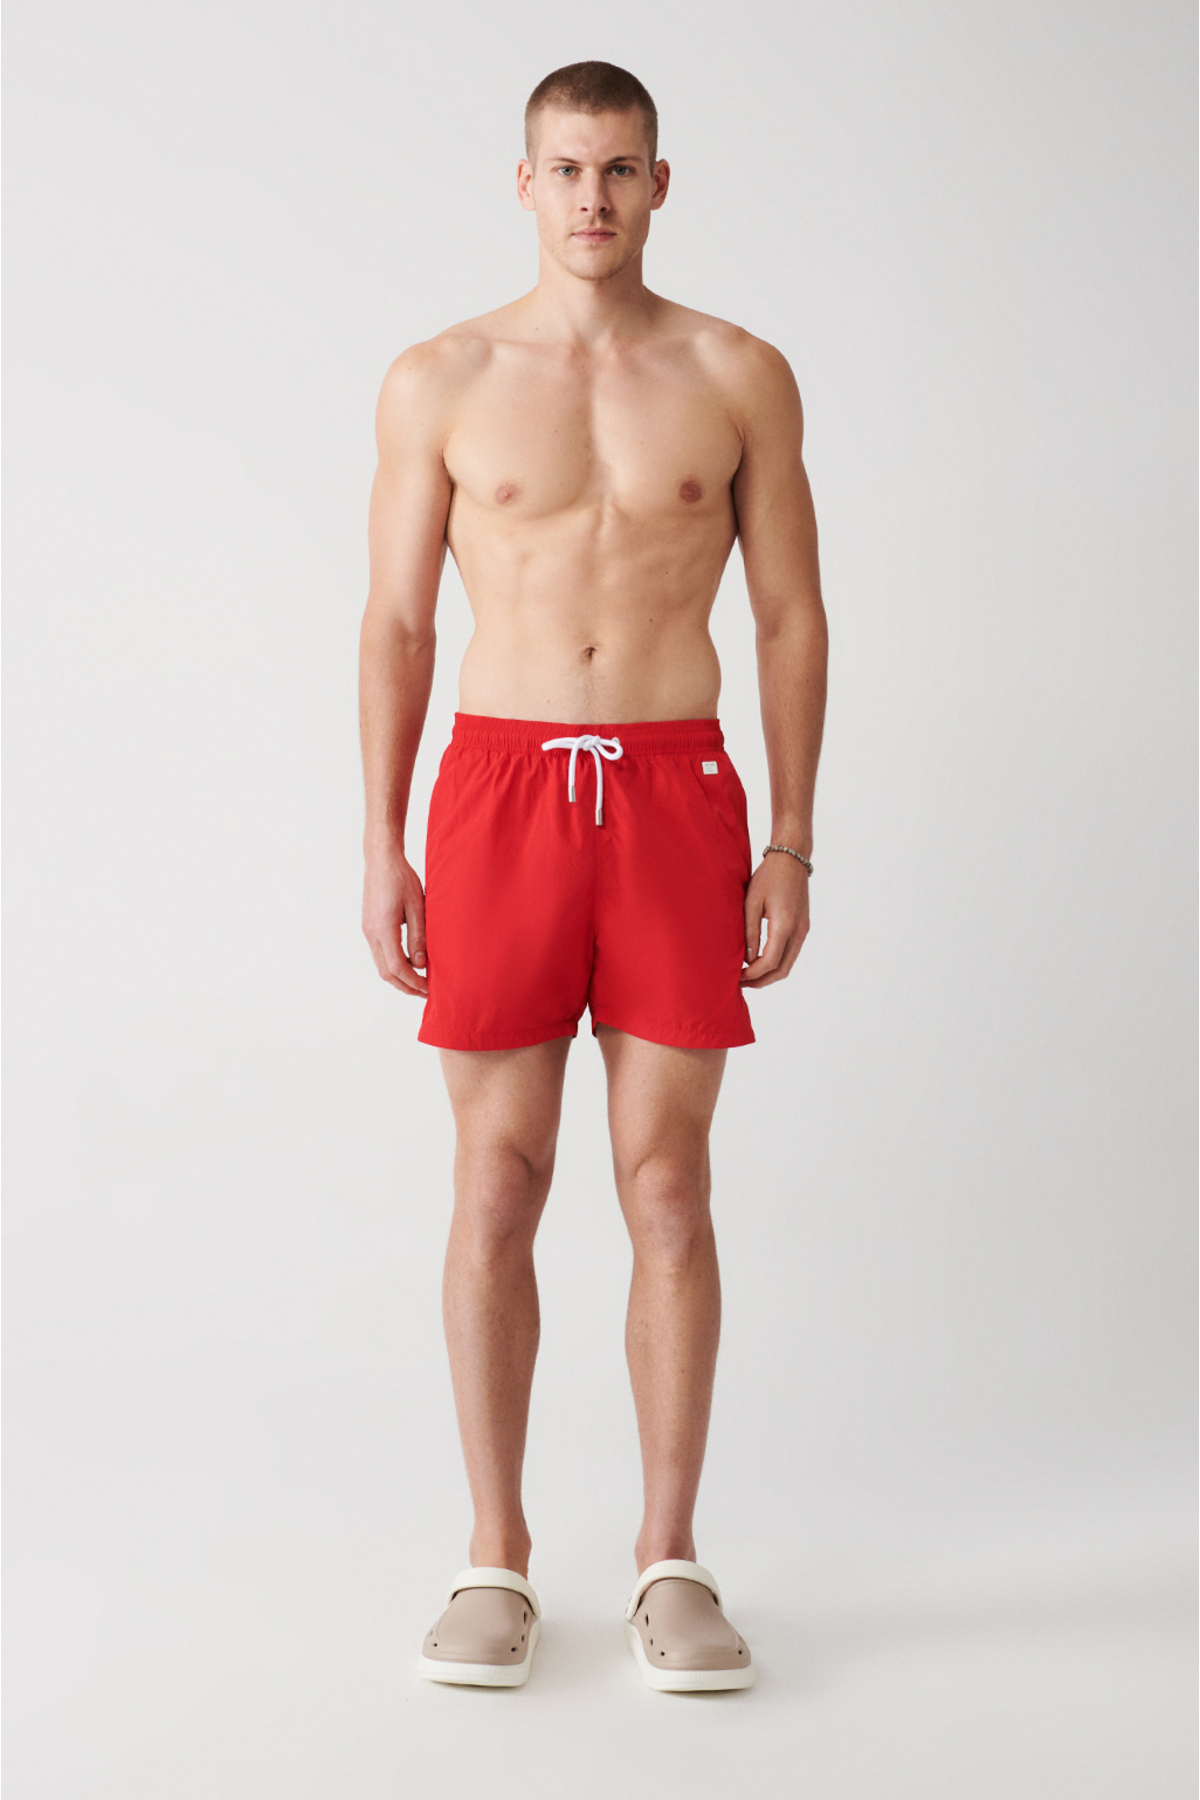 Avva Red Fast Drying Standard Size Plain Special Boxed Comfort Fit Swimsuit Sea Shorts